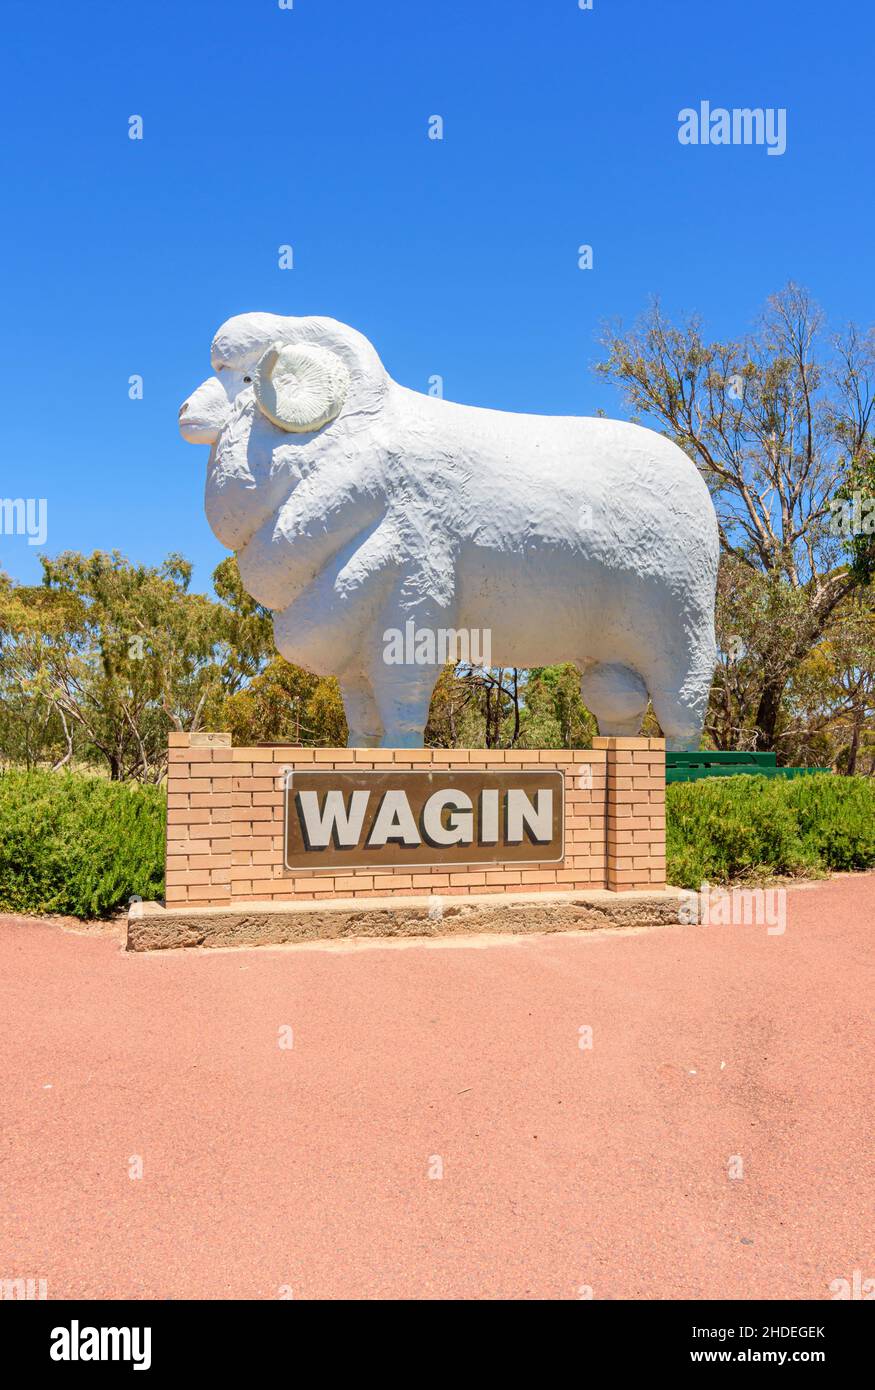 The Big Ram at the Giant Ram Tourist Park in the country town of Wagin, Western Australia, Australia Stock Photo